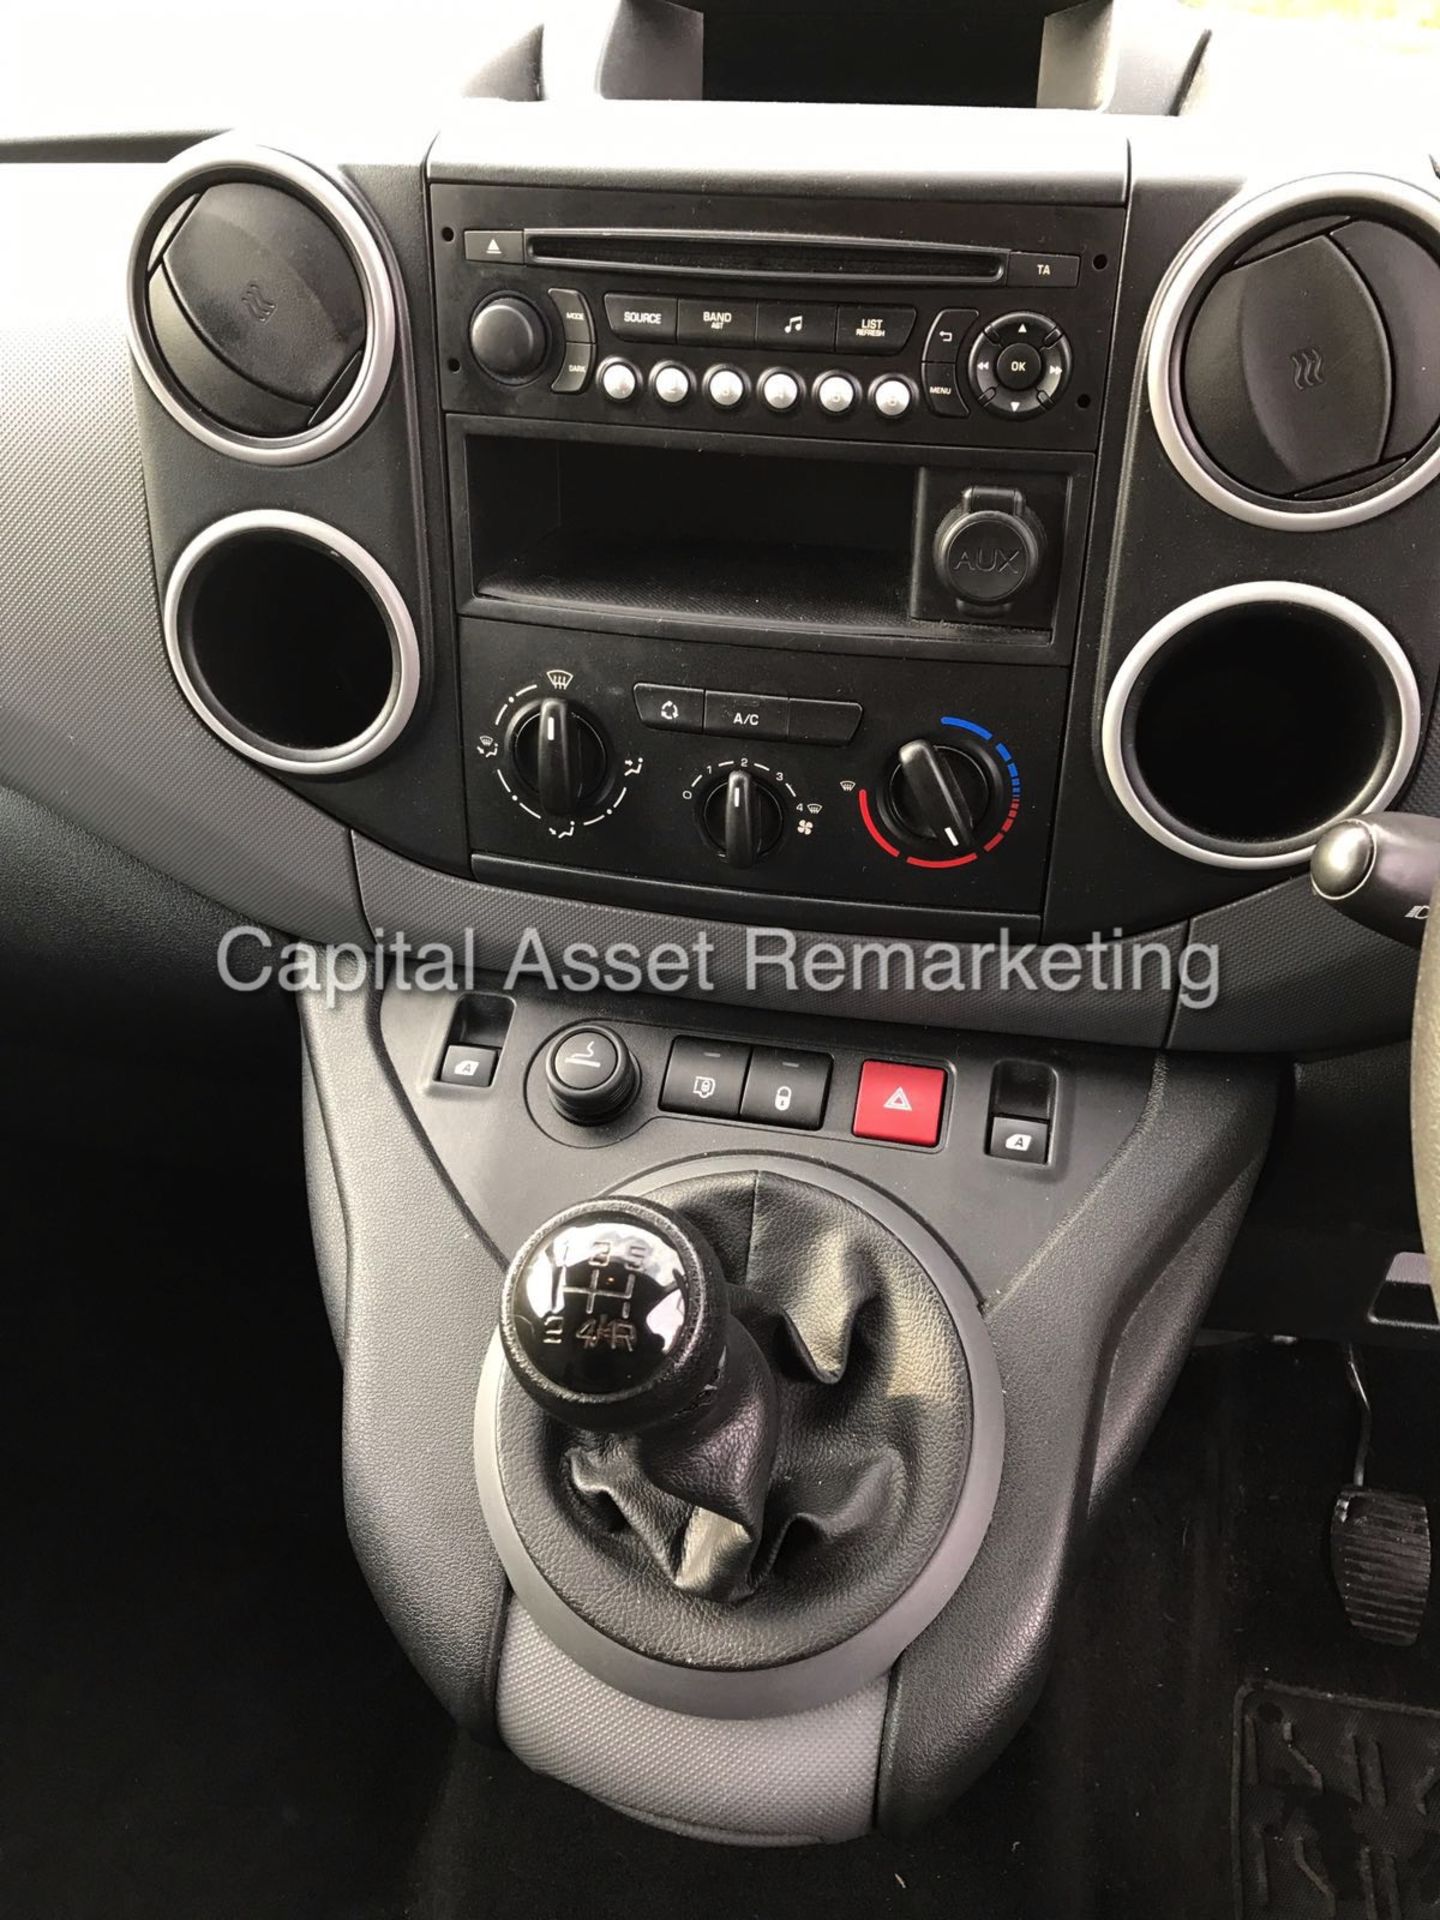 PEUGEOT PARTNER 1.6HDI "PROFESSIONAL" STOP/START - AIR CON - MASSIVE SPEC - SILVER - (2014) MODEL!!! - Image 9 of 12